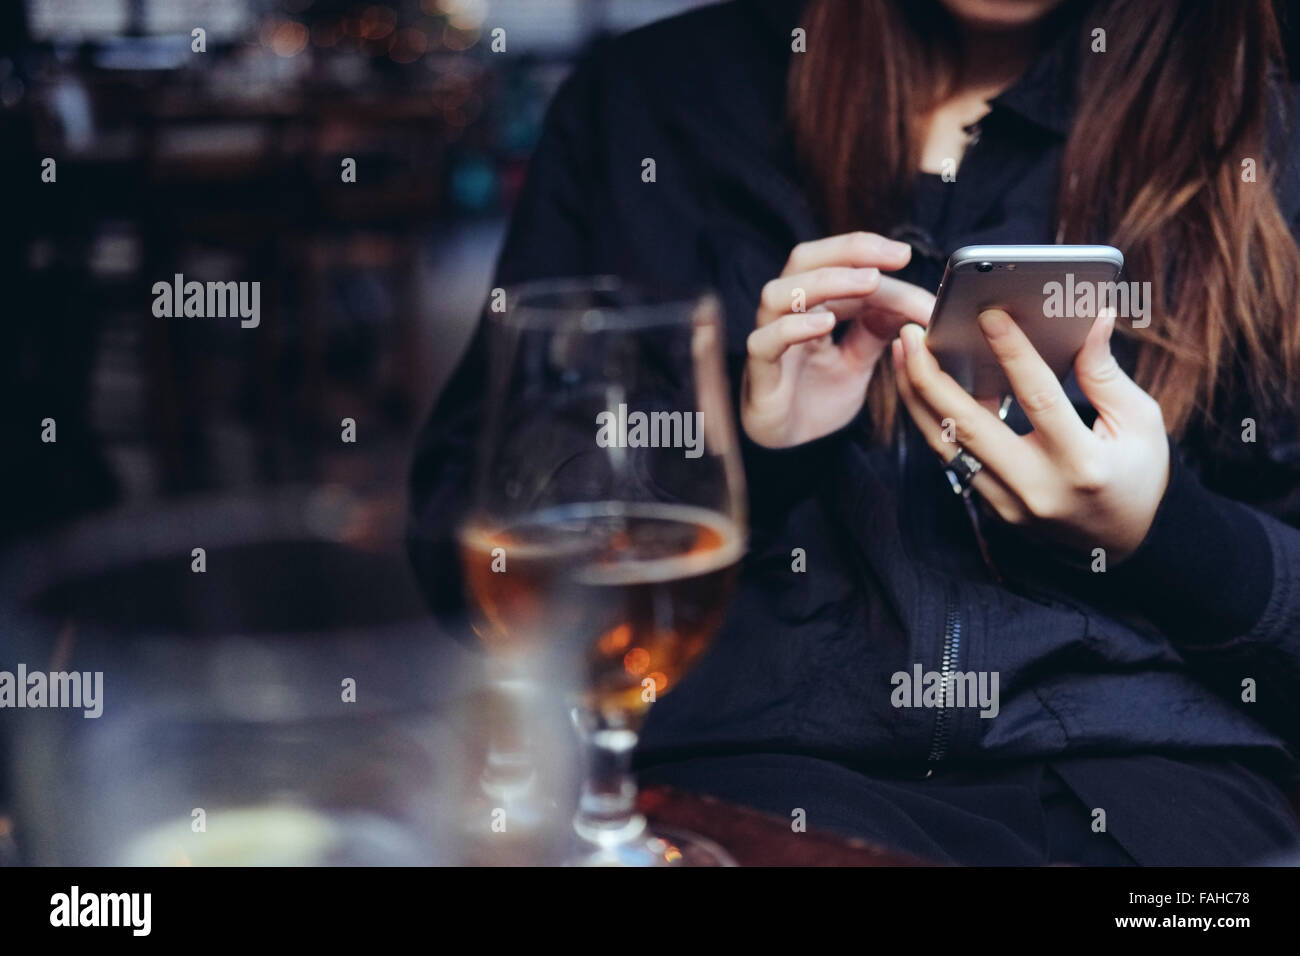 Young woman using a smartphone in bar Stock Photo